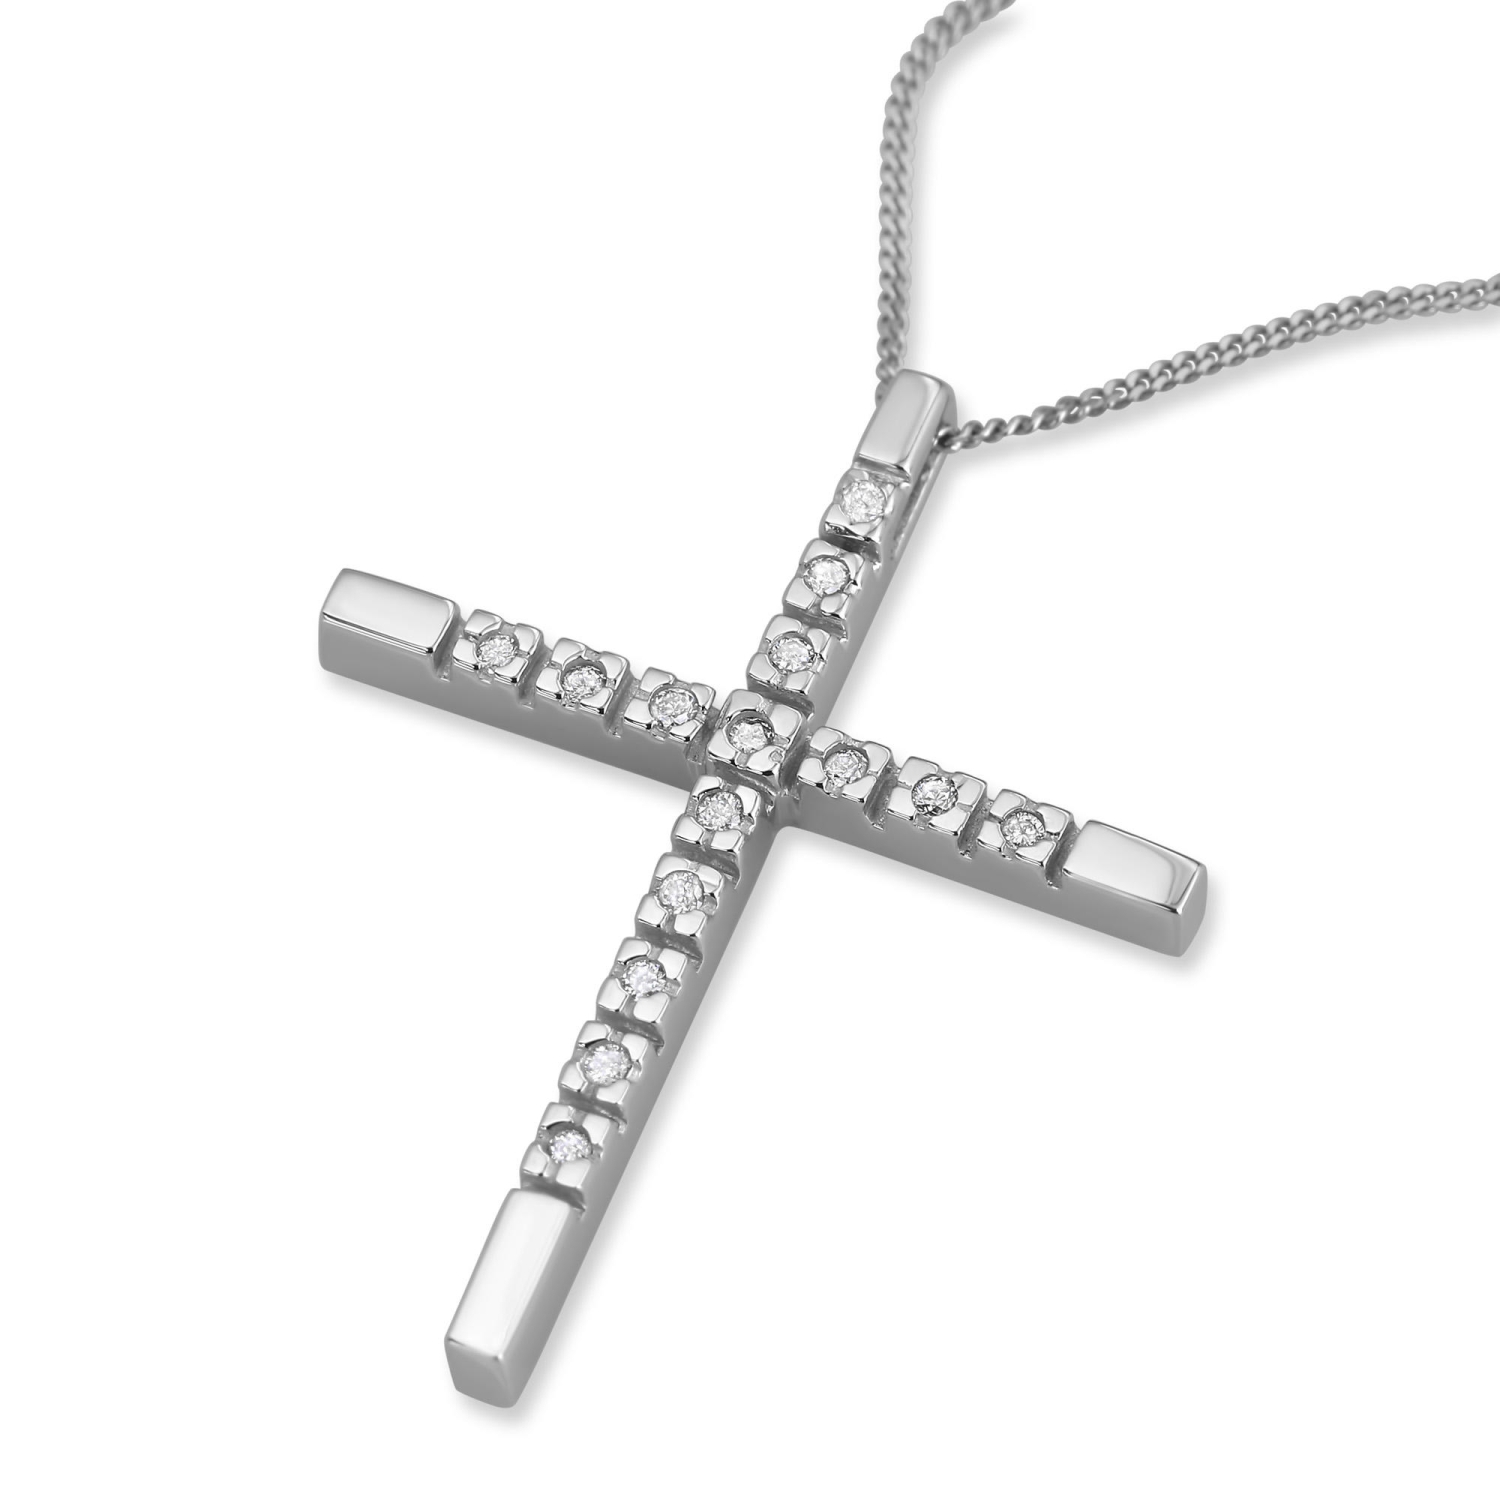 14K White Gold and Diamond Cross Necklace with 15 Diamonds - 1